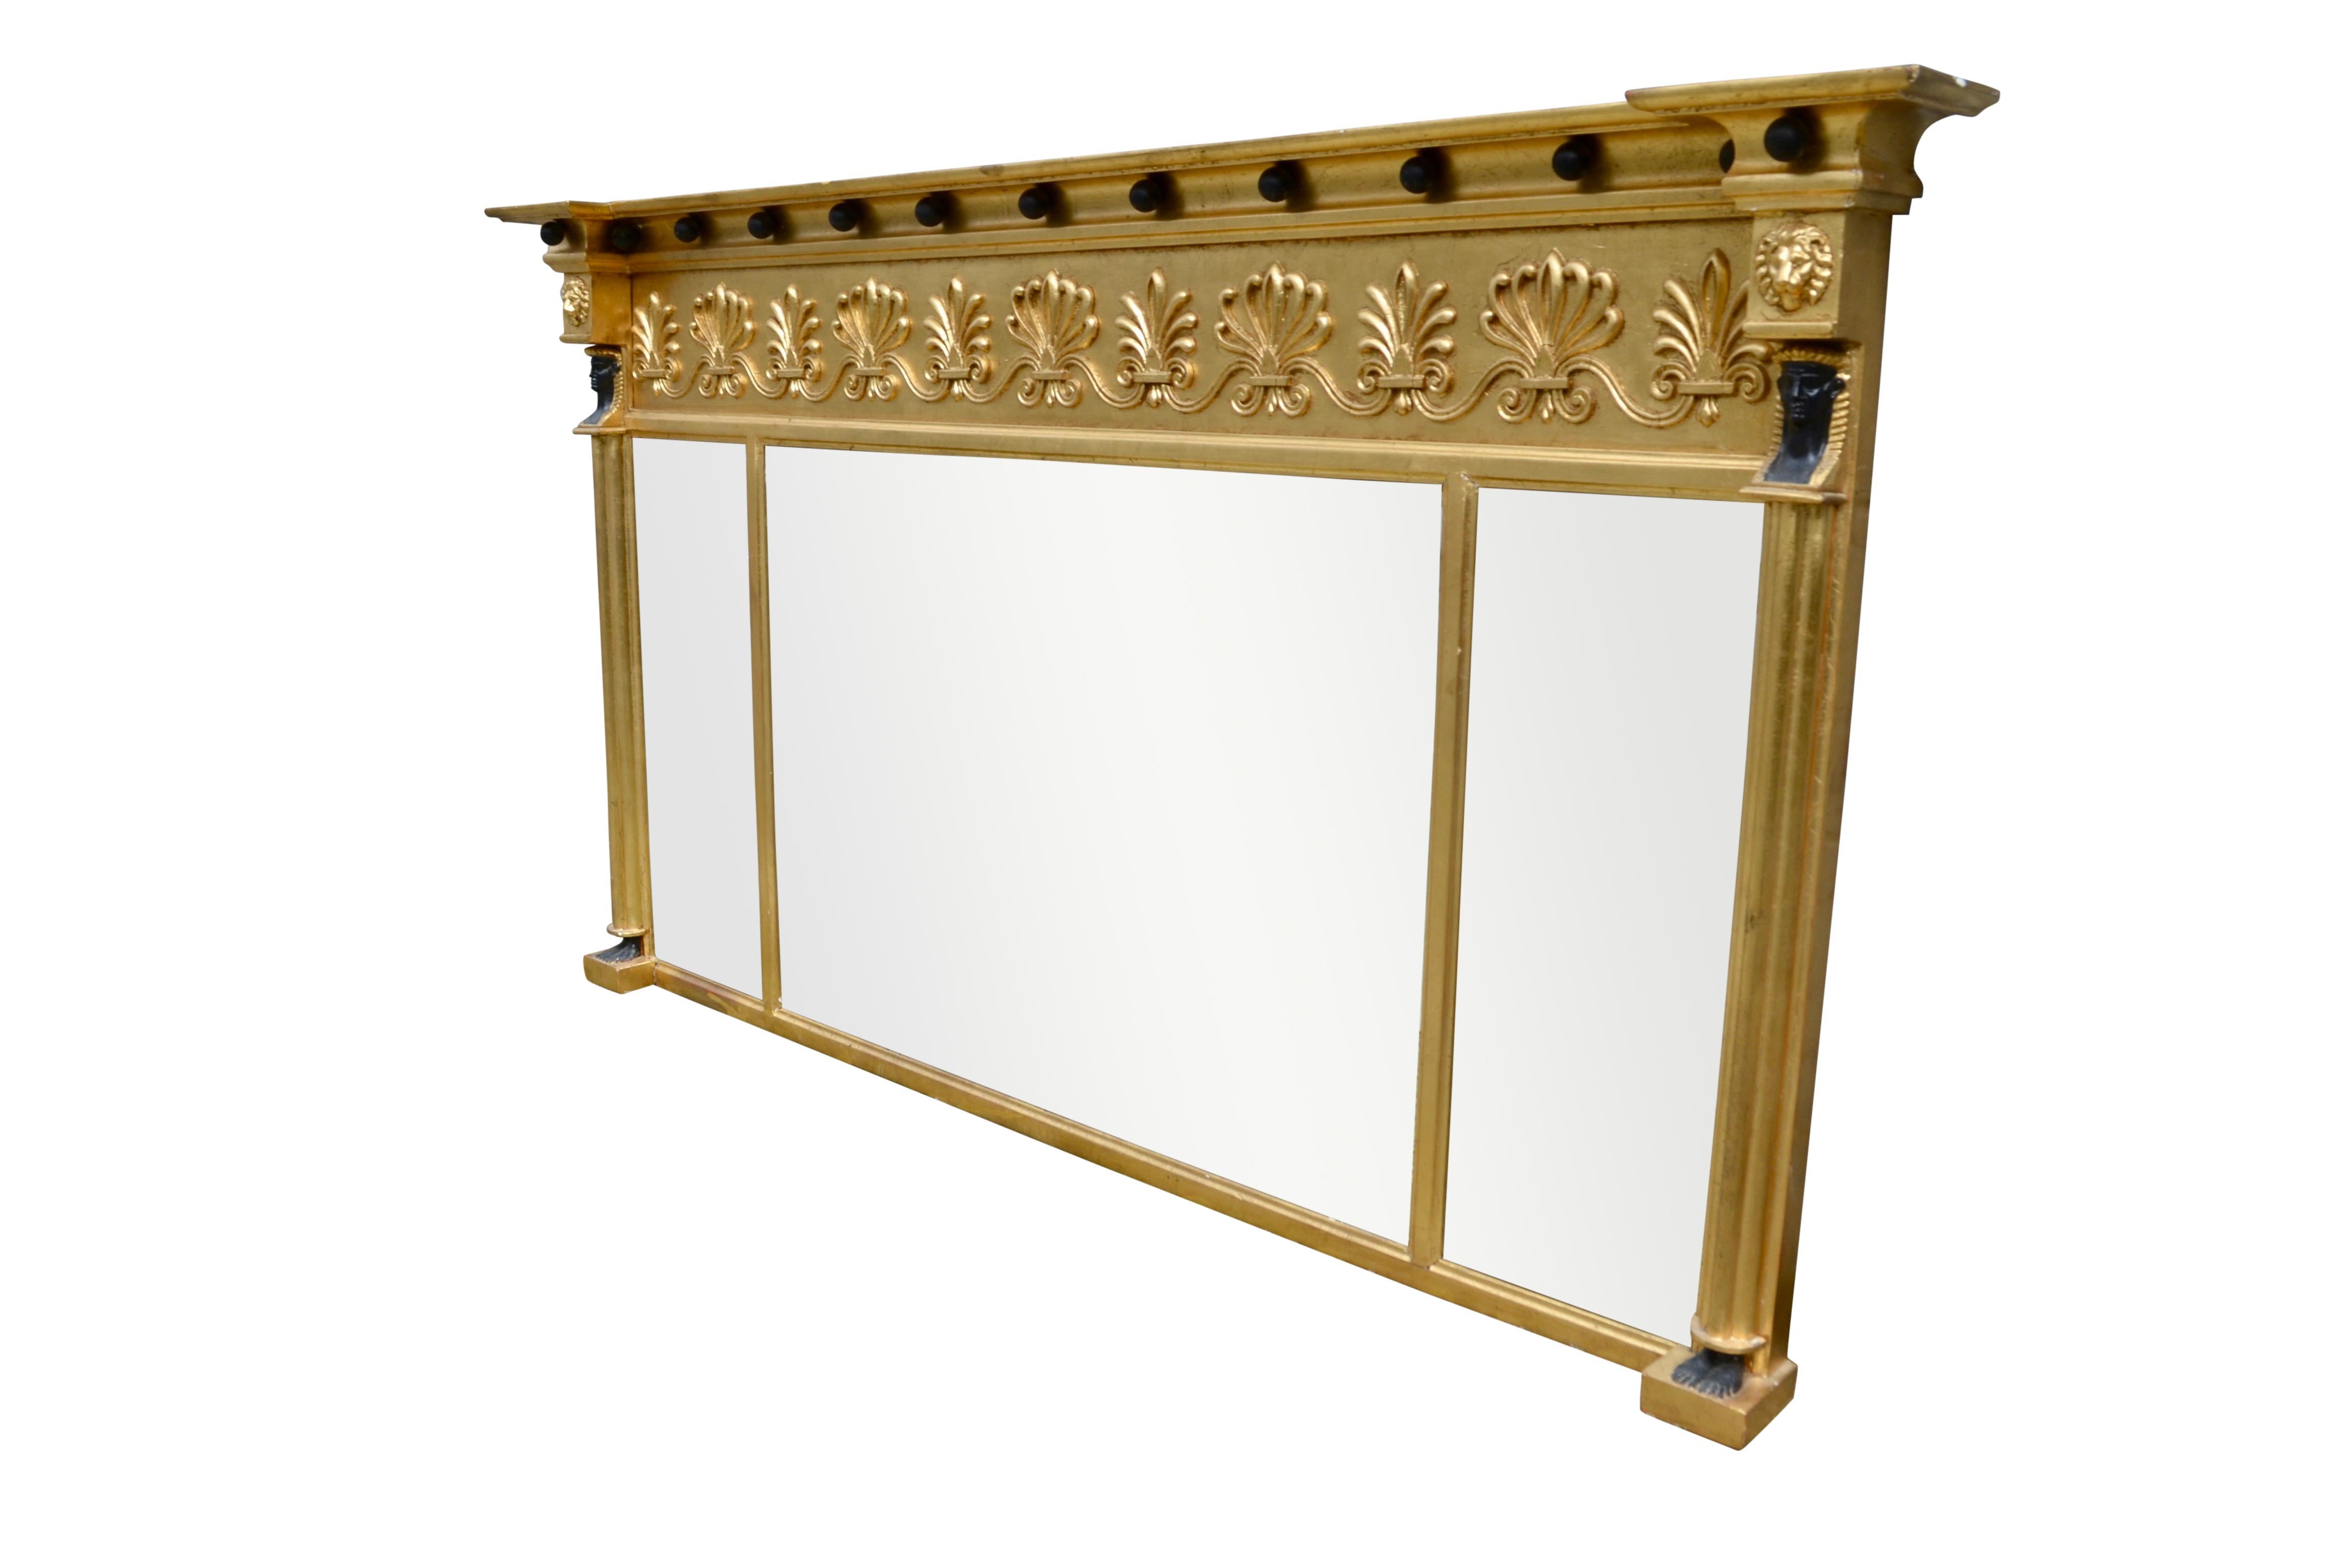 19 Century English Regency Neo Classical Gilt Wood Mirror In Good Condition For Sale In Vancouver, British Columbia